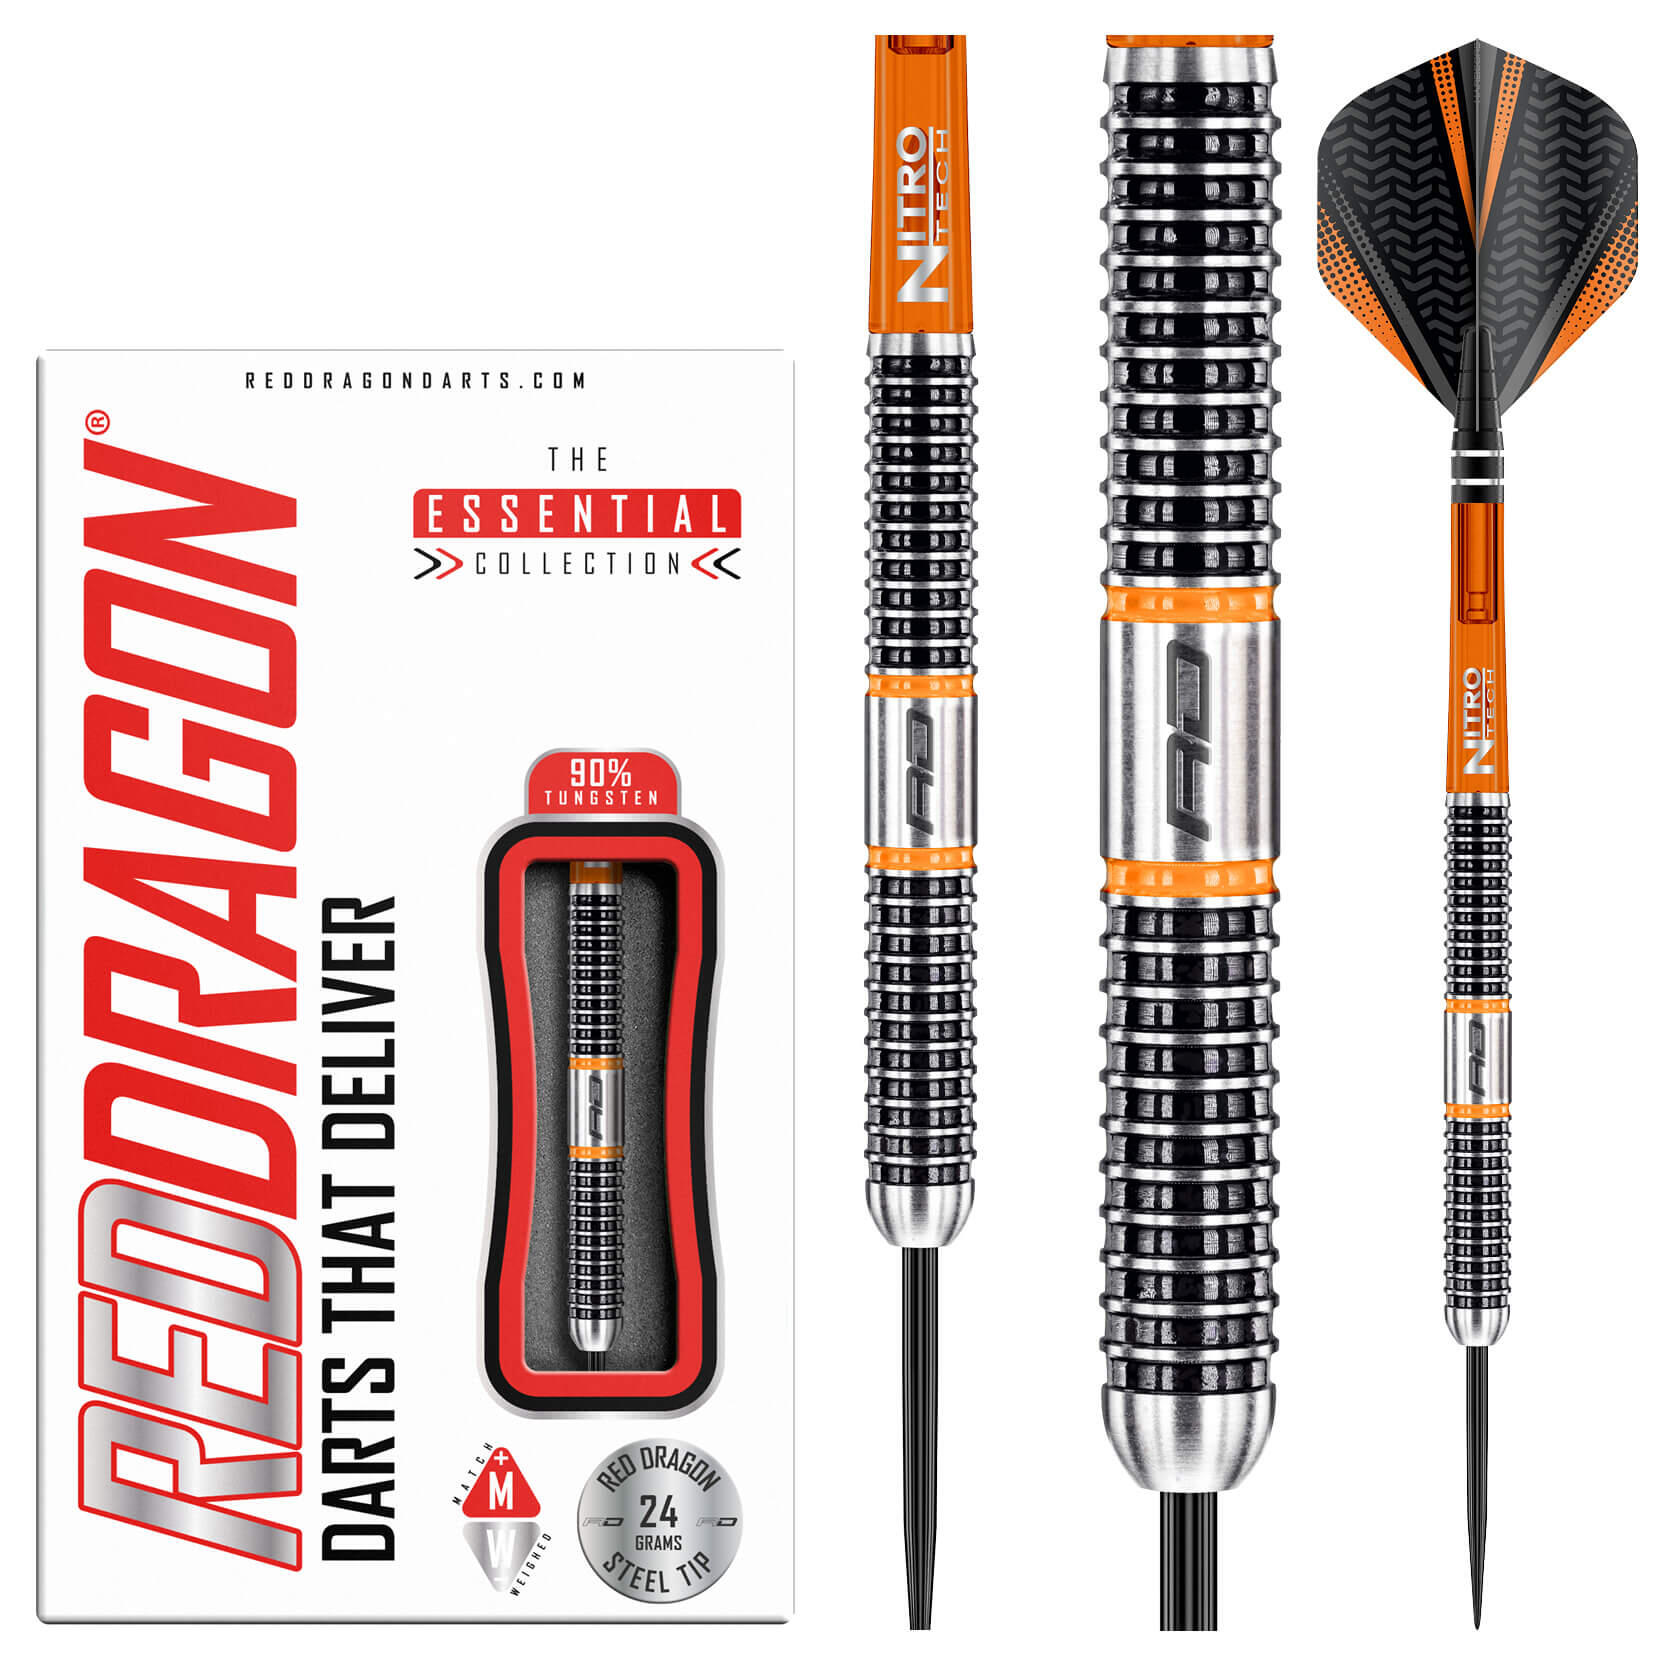 RED DRAGON DARTS Amberjack 18: 24g Tungsten Darts Set with Flights and Stems